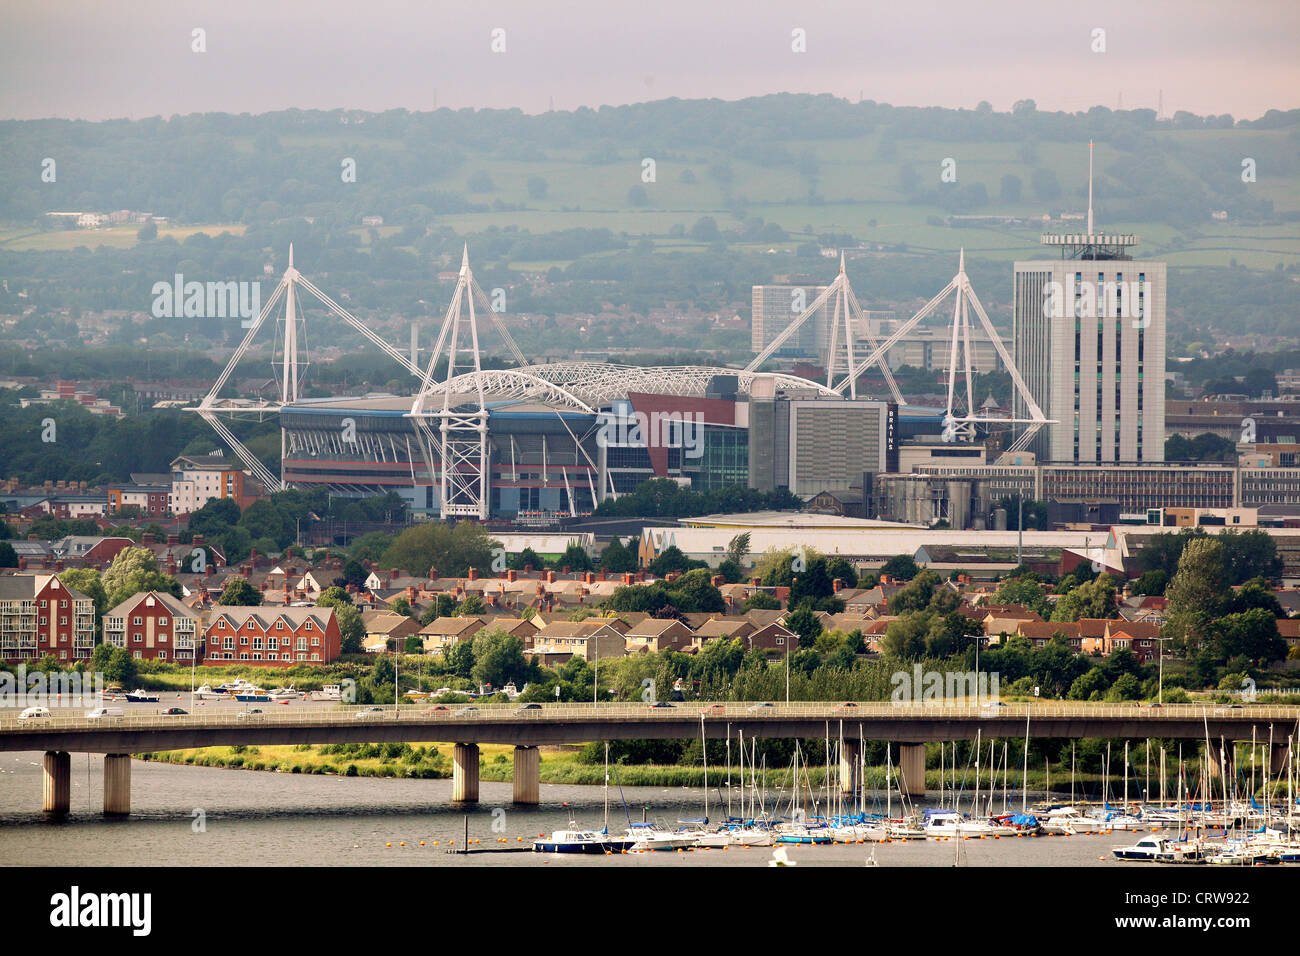 Millennium Stadium and the A4232 Grangetown Link in Cardiff as seen from Penarth, Vale of Glamorgan south Wales Stock Photo